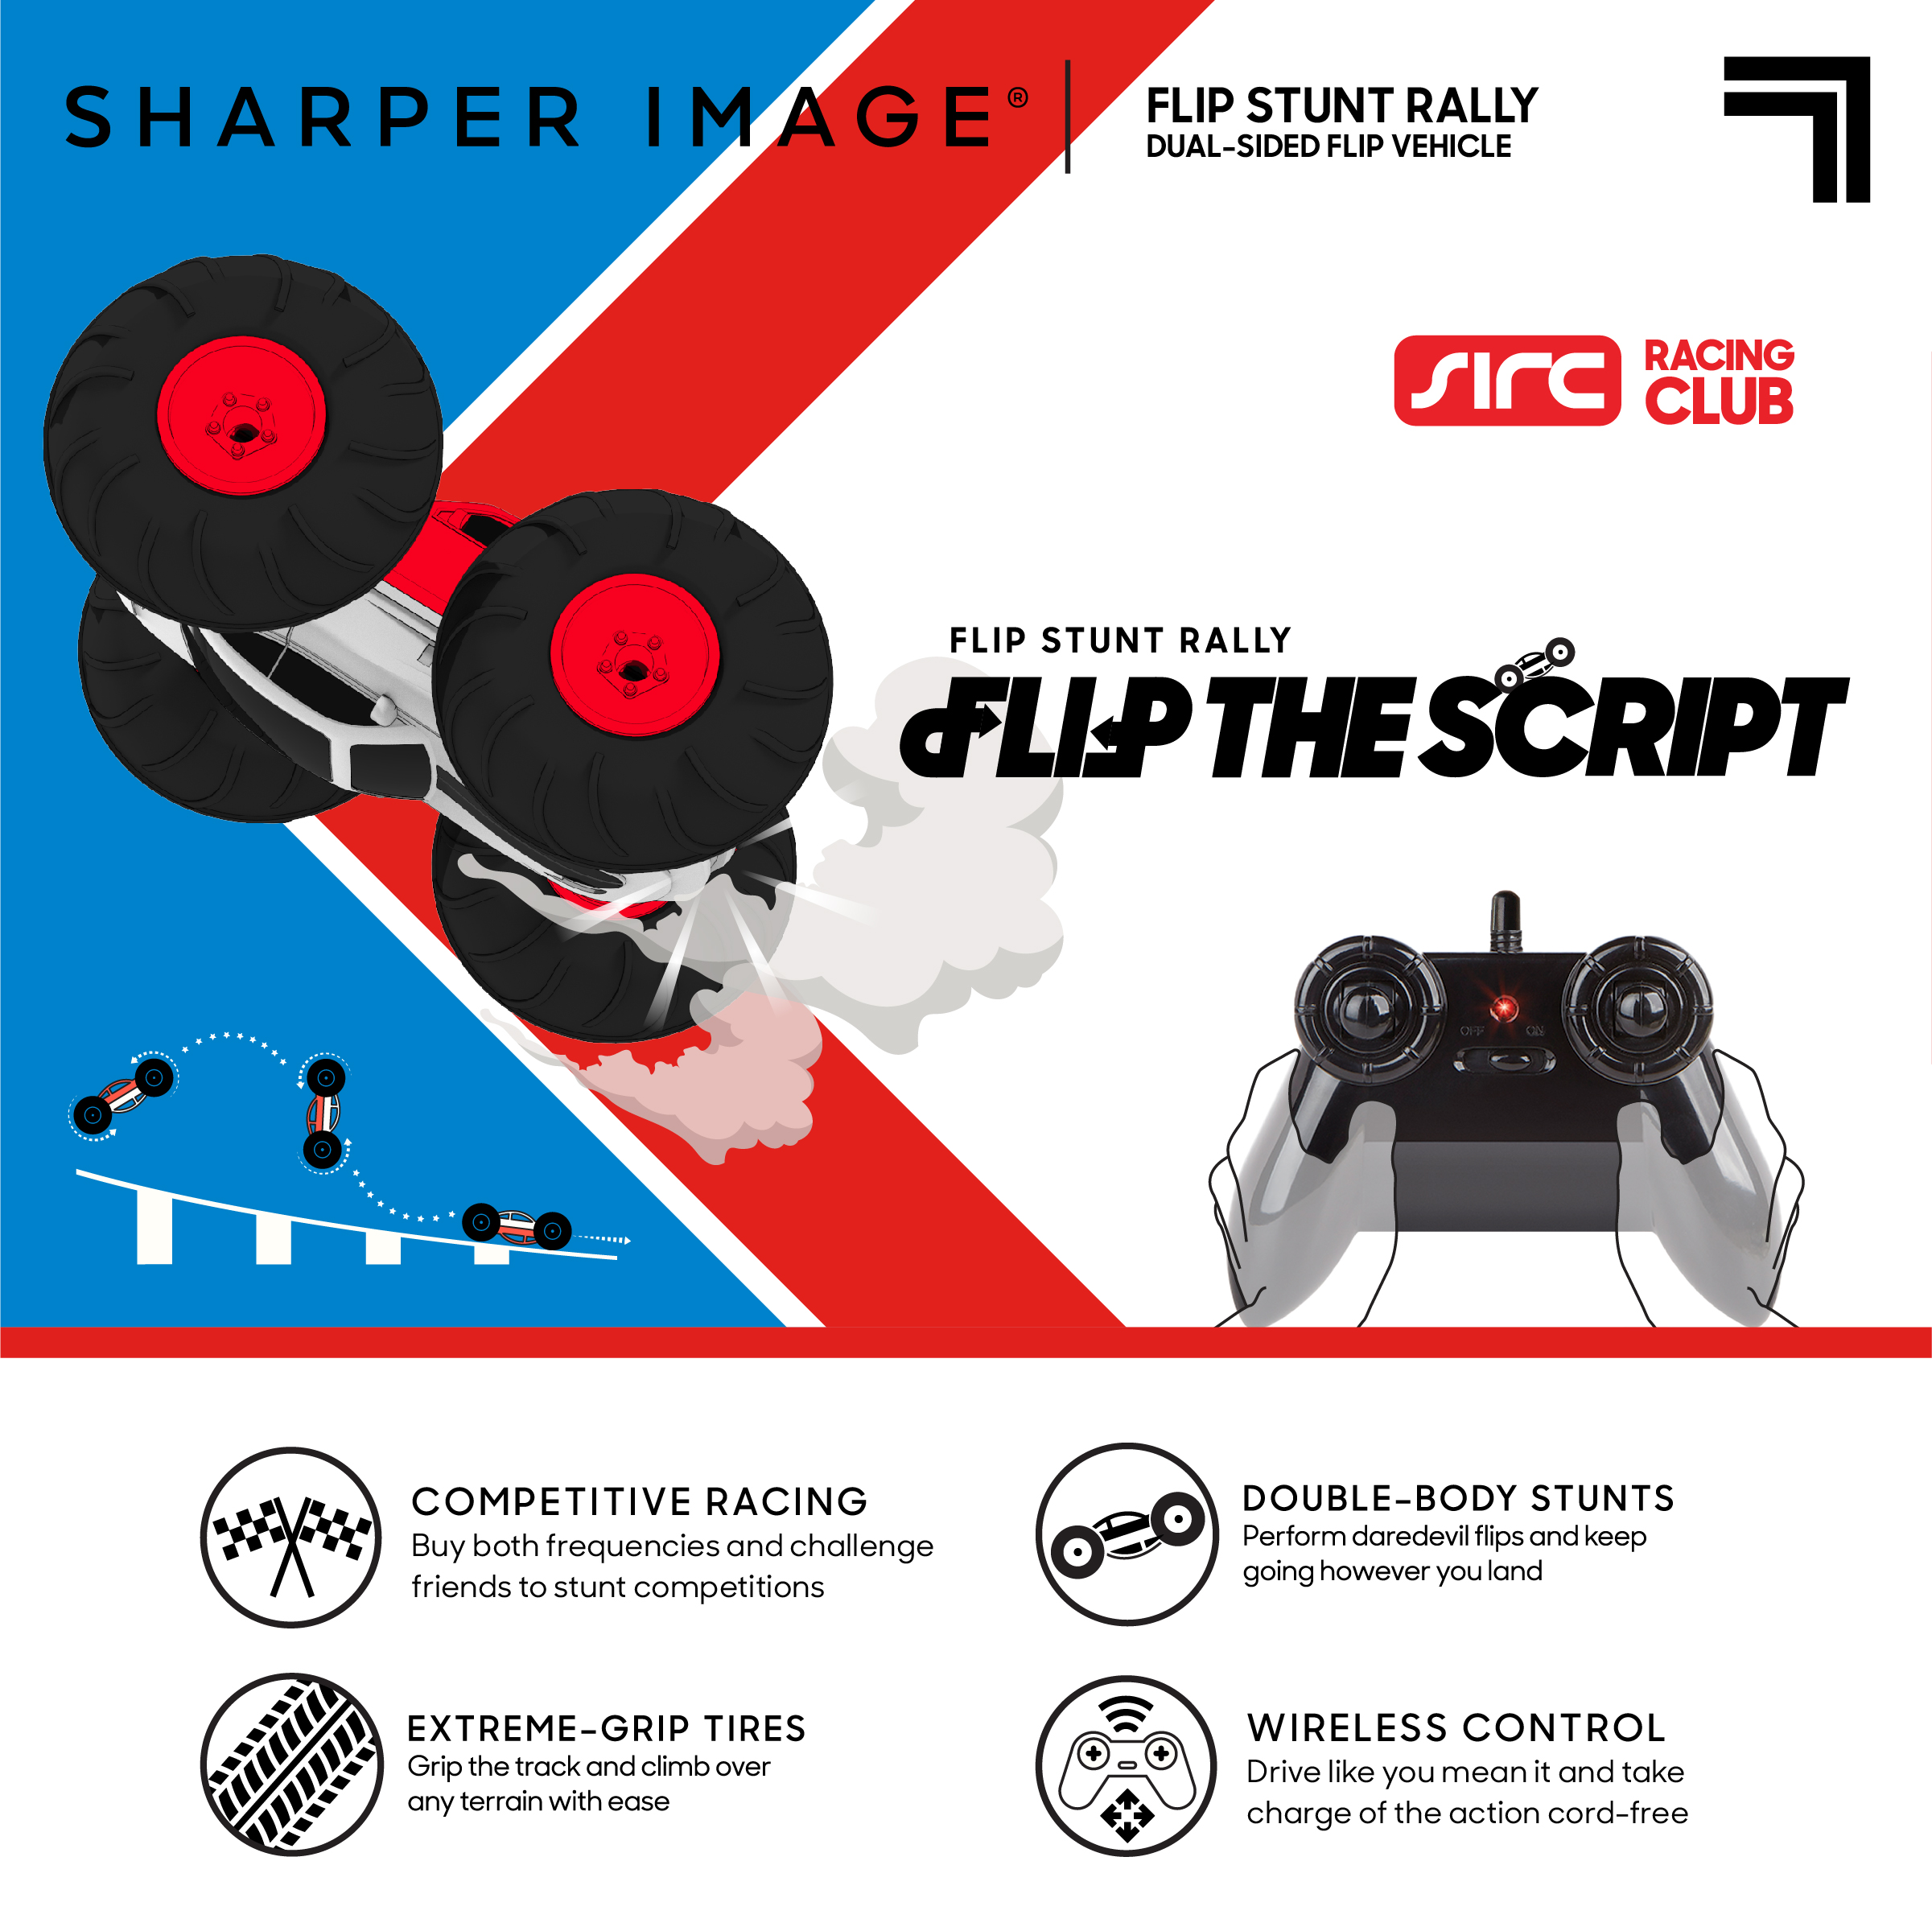 Sharper Image Remote Control RC Cars Flip Stunt Rally Car Toy for Kids, 49 MHz, 2-in-1 Reversible Design for Racing, Cool Stunts, Tricks, Led Headlights, AAA Battery Powered, Red/White Design - image 4 of 13